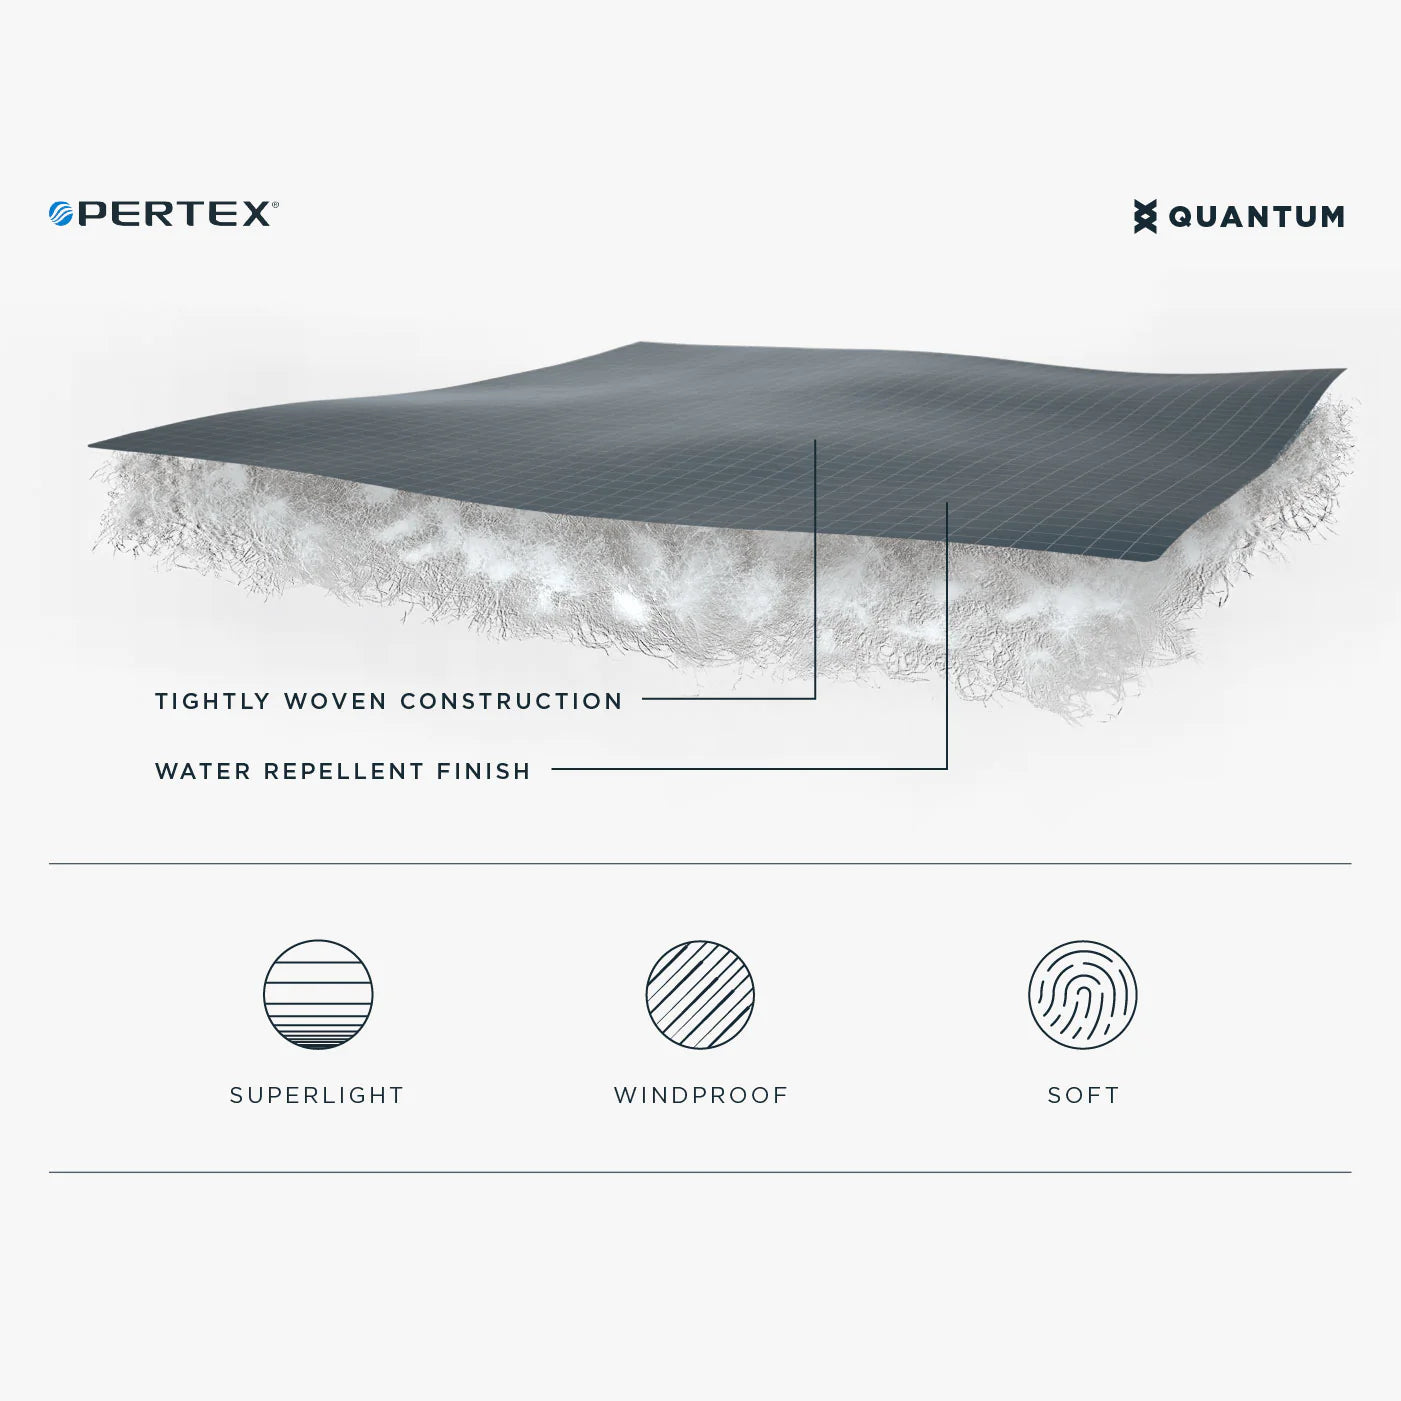 PERTEX® QUANTUM ECO fabric. Windproof and water repellent weather protection.